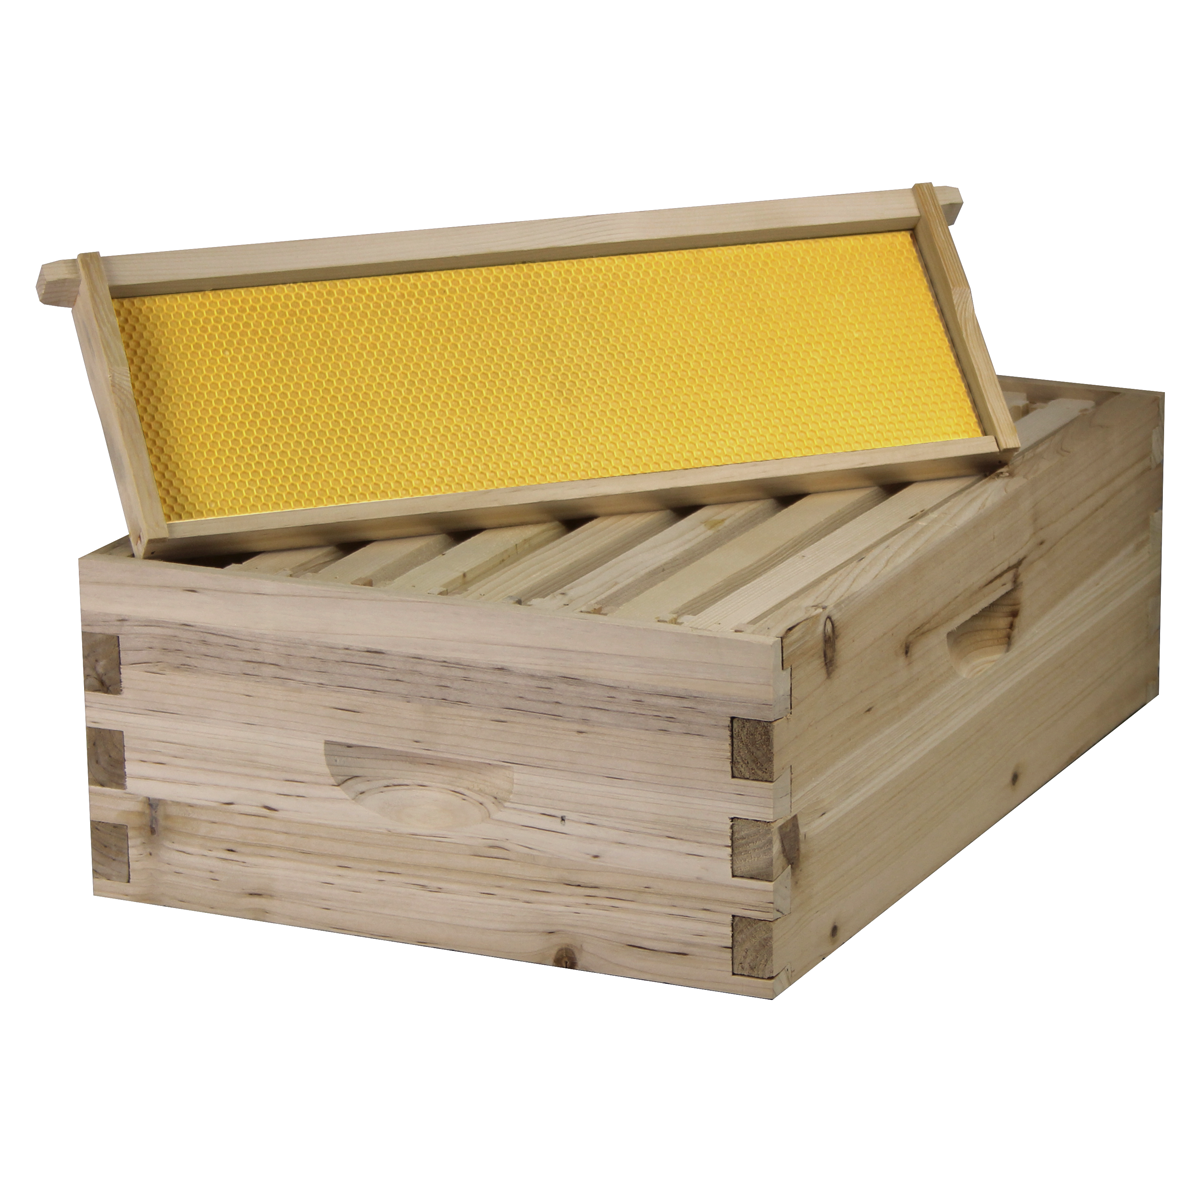 NuBee 8 Frame Medium Bee Box Uses Dovetail Joints